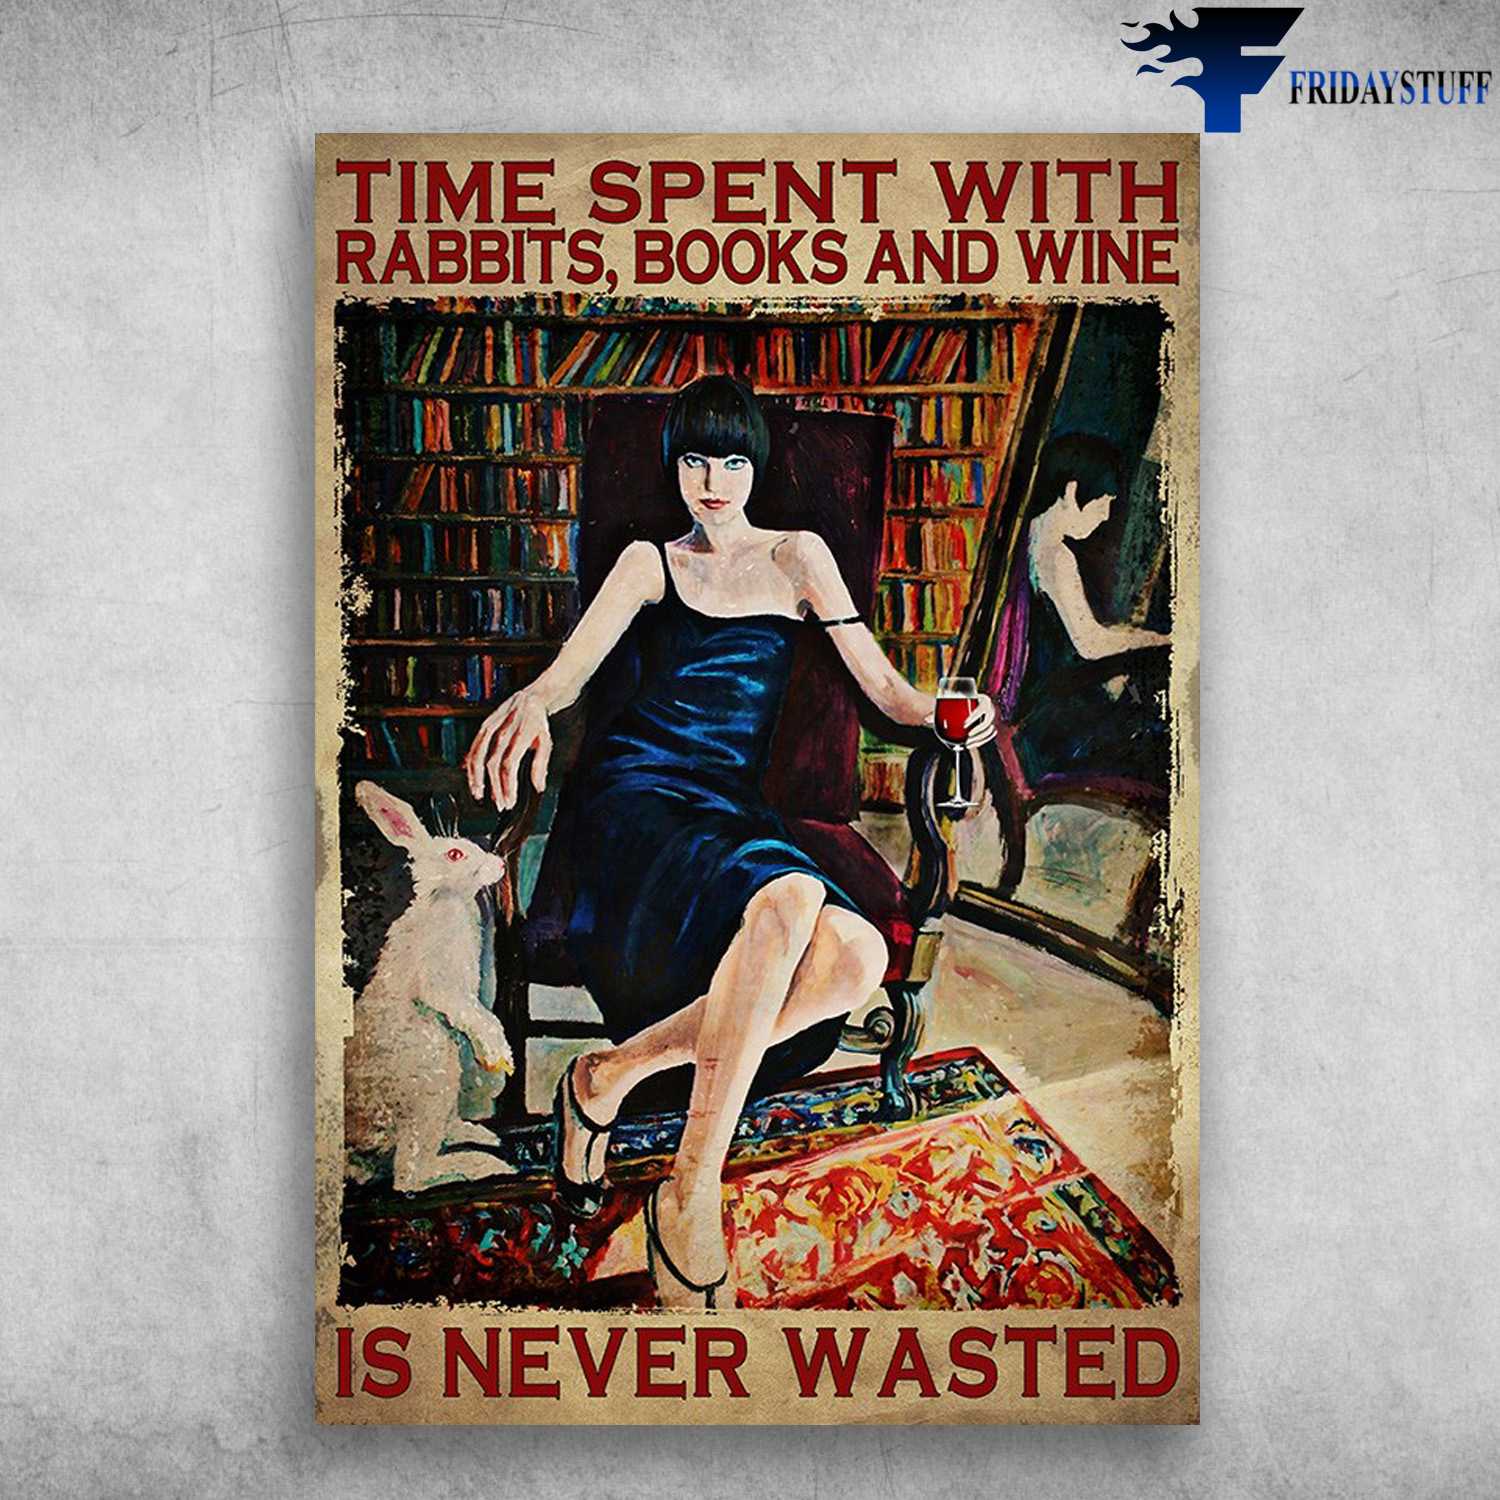 Girl Loves Rabbit, Drink And Read - Time Spent With Rabbit, Books And Wine, Is Never Wasted